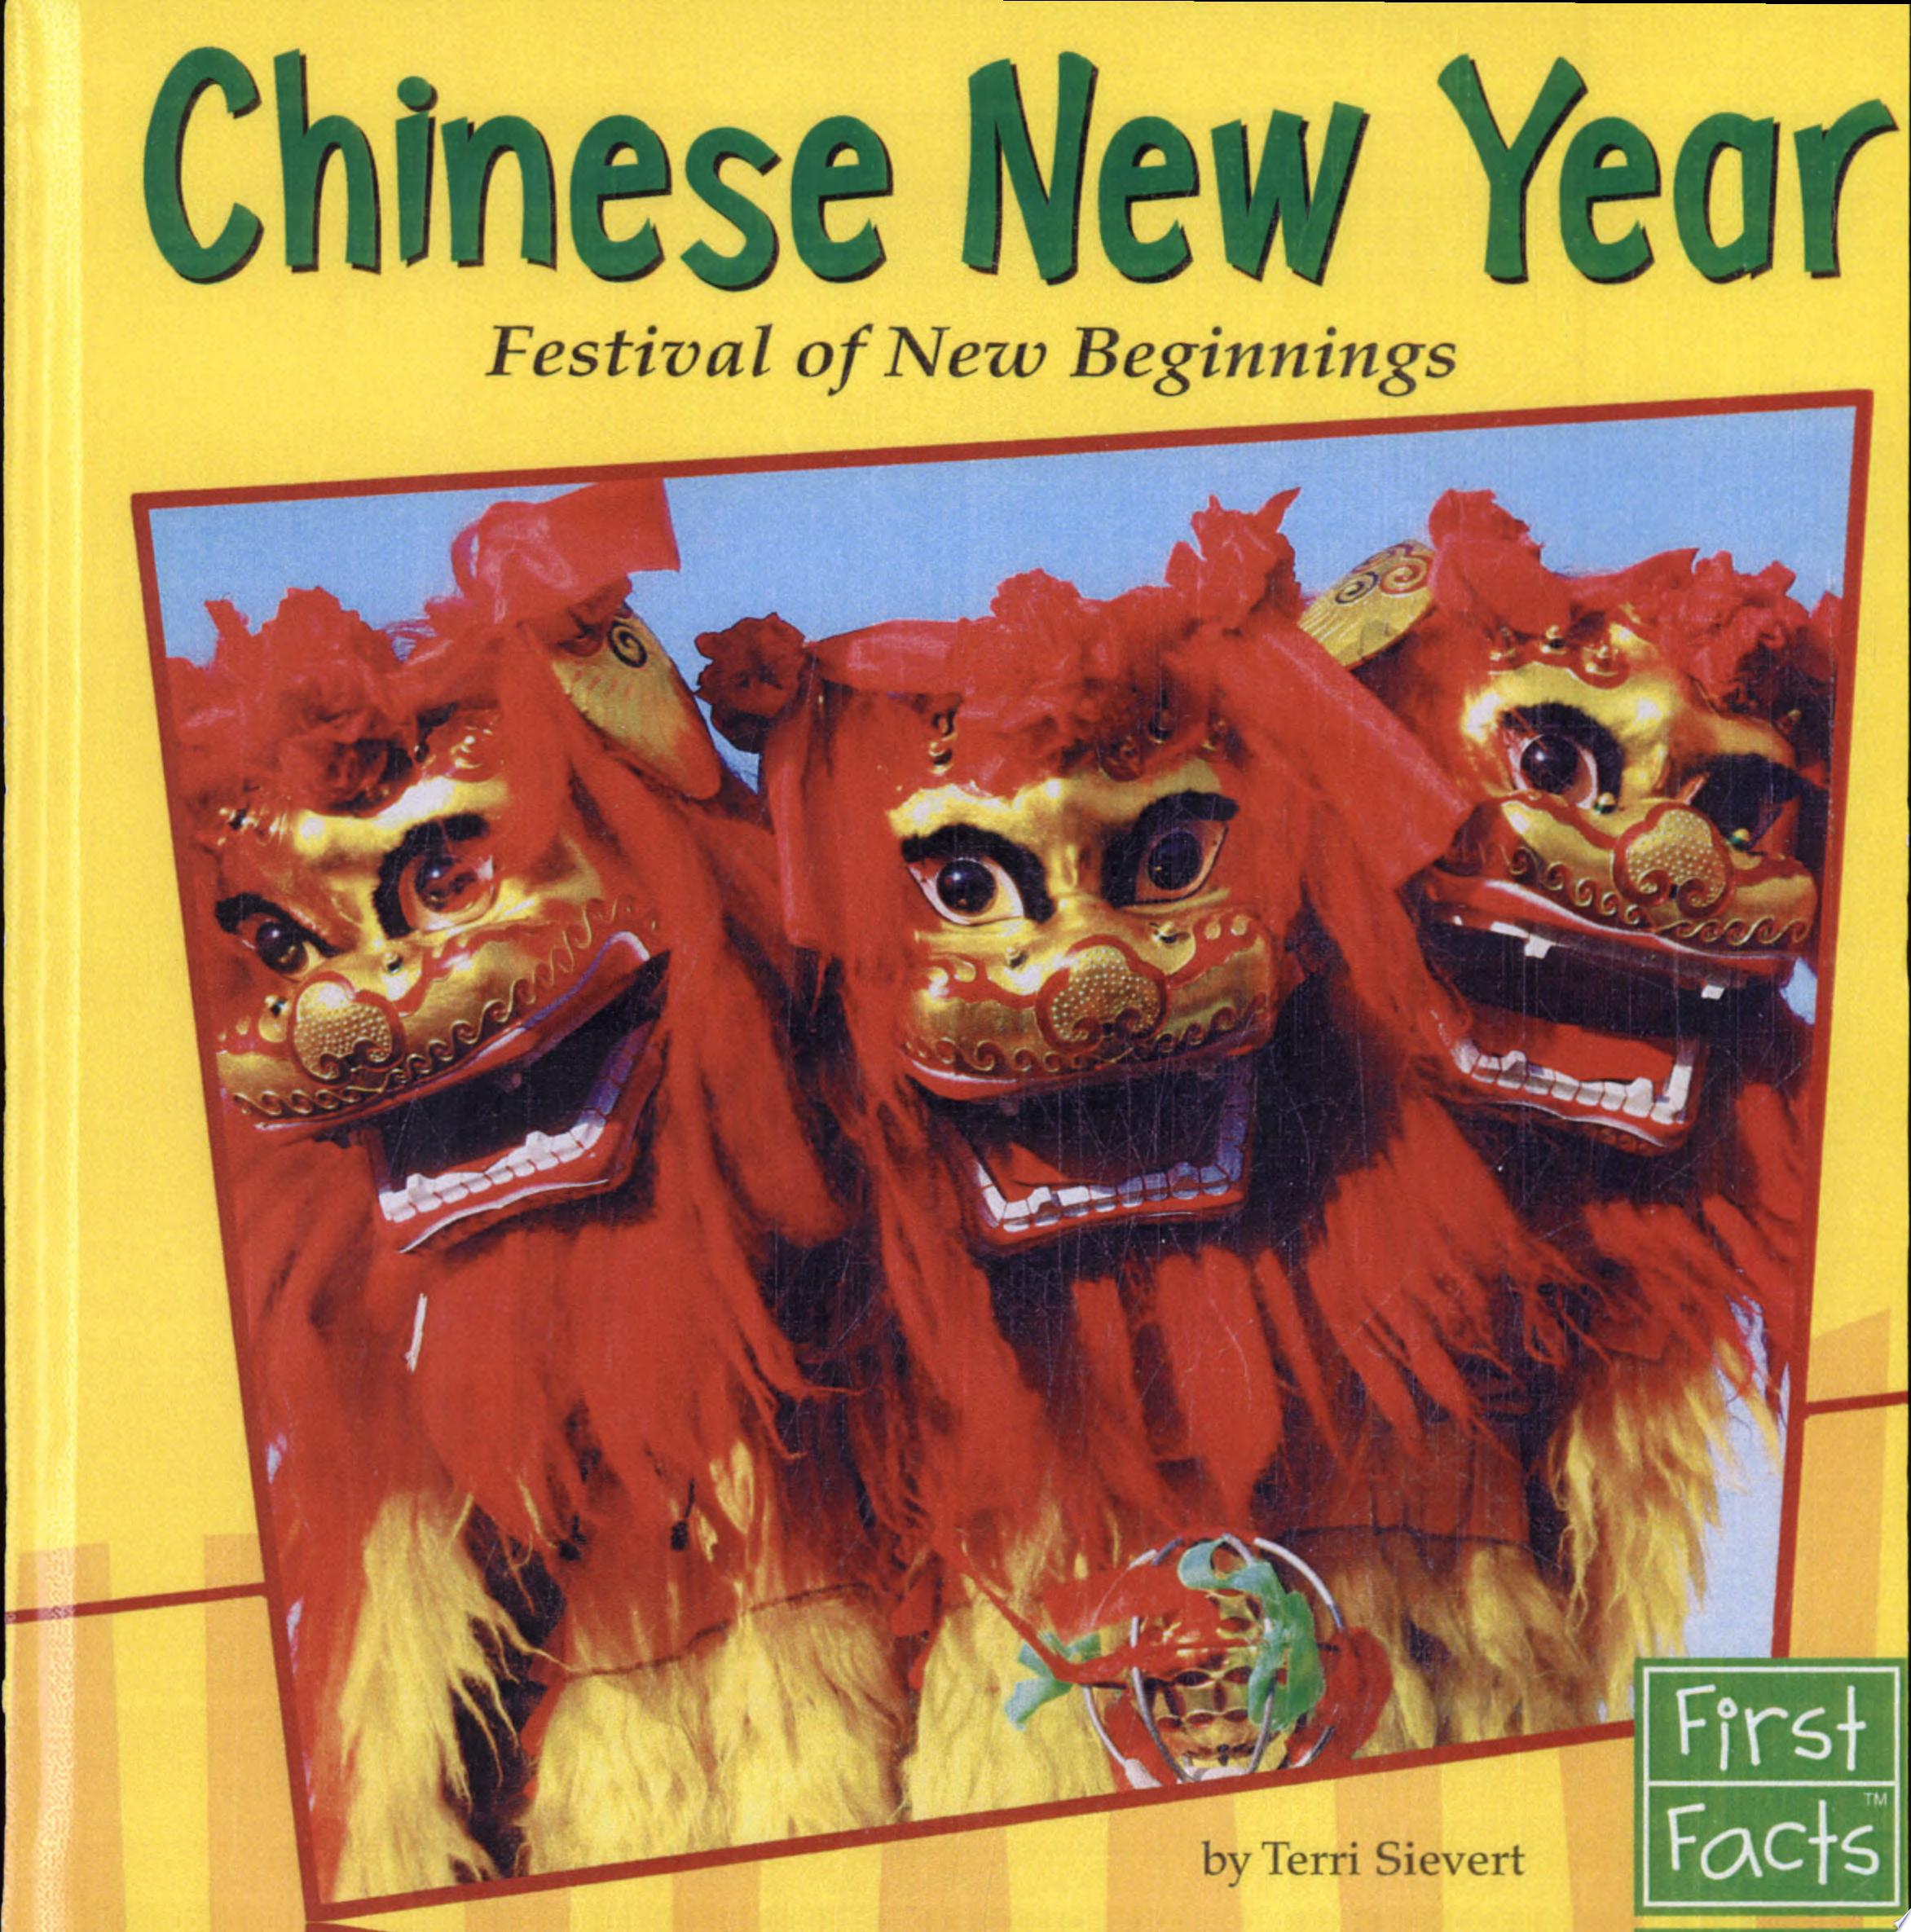 Image for "Chinese New Year"